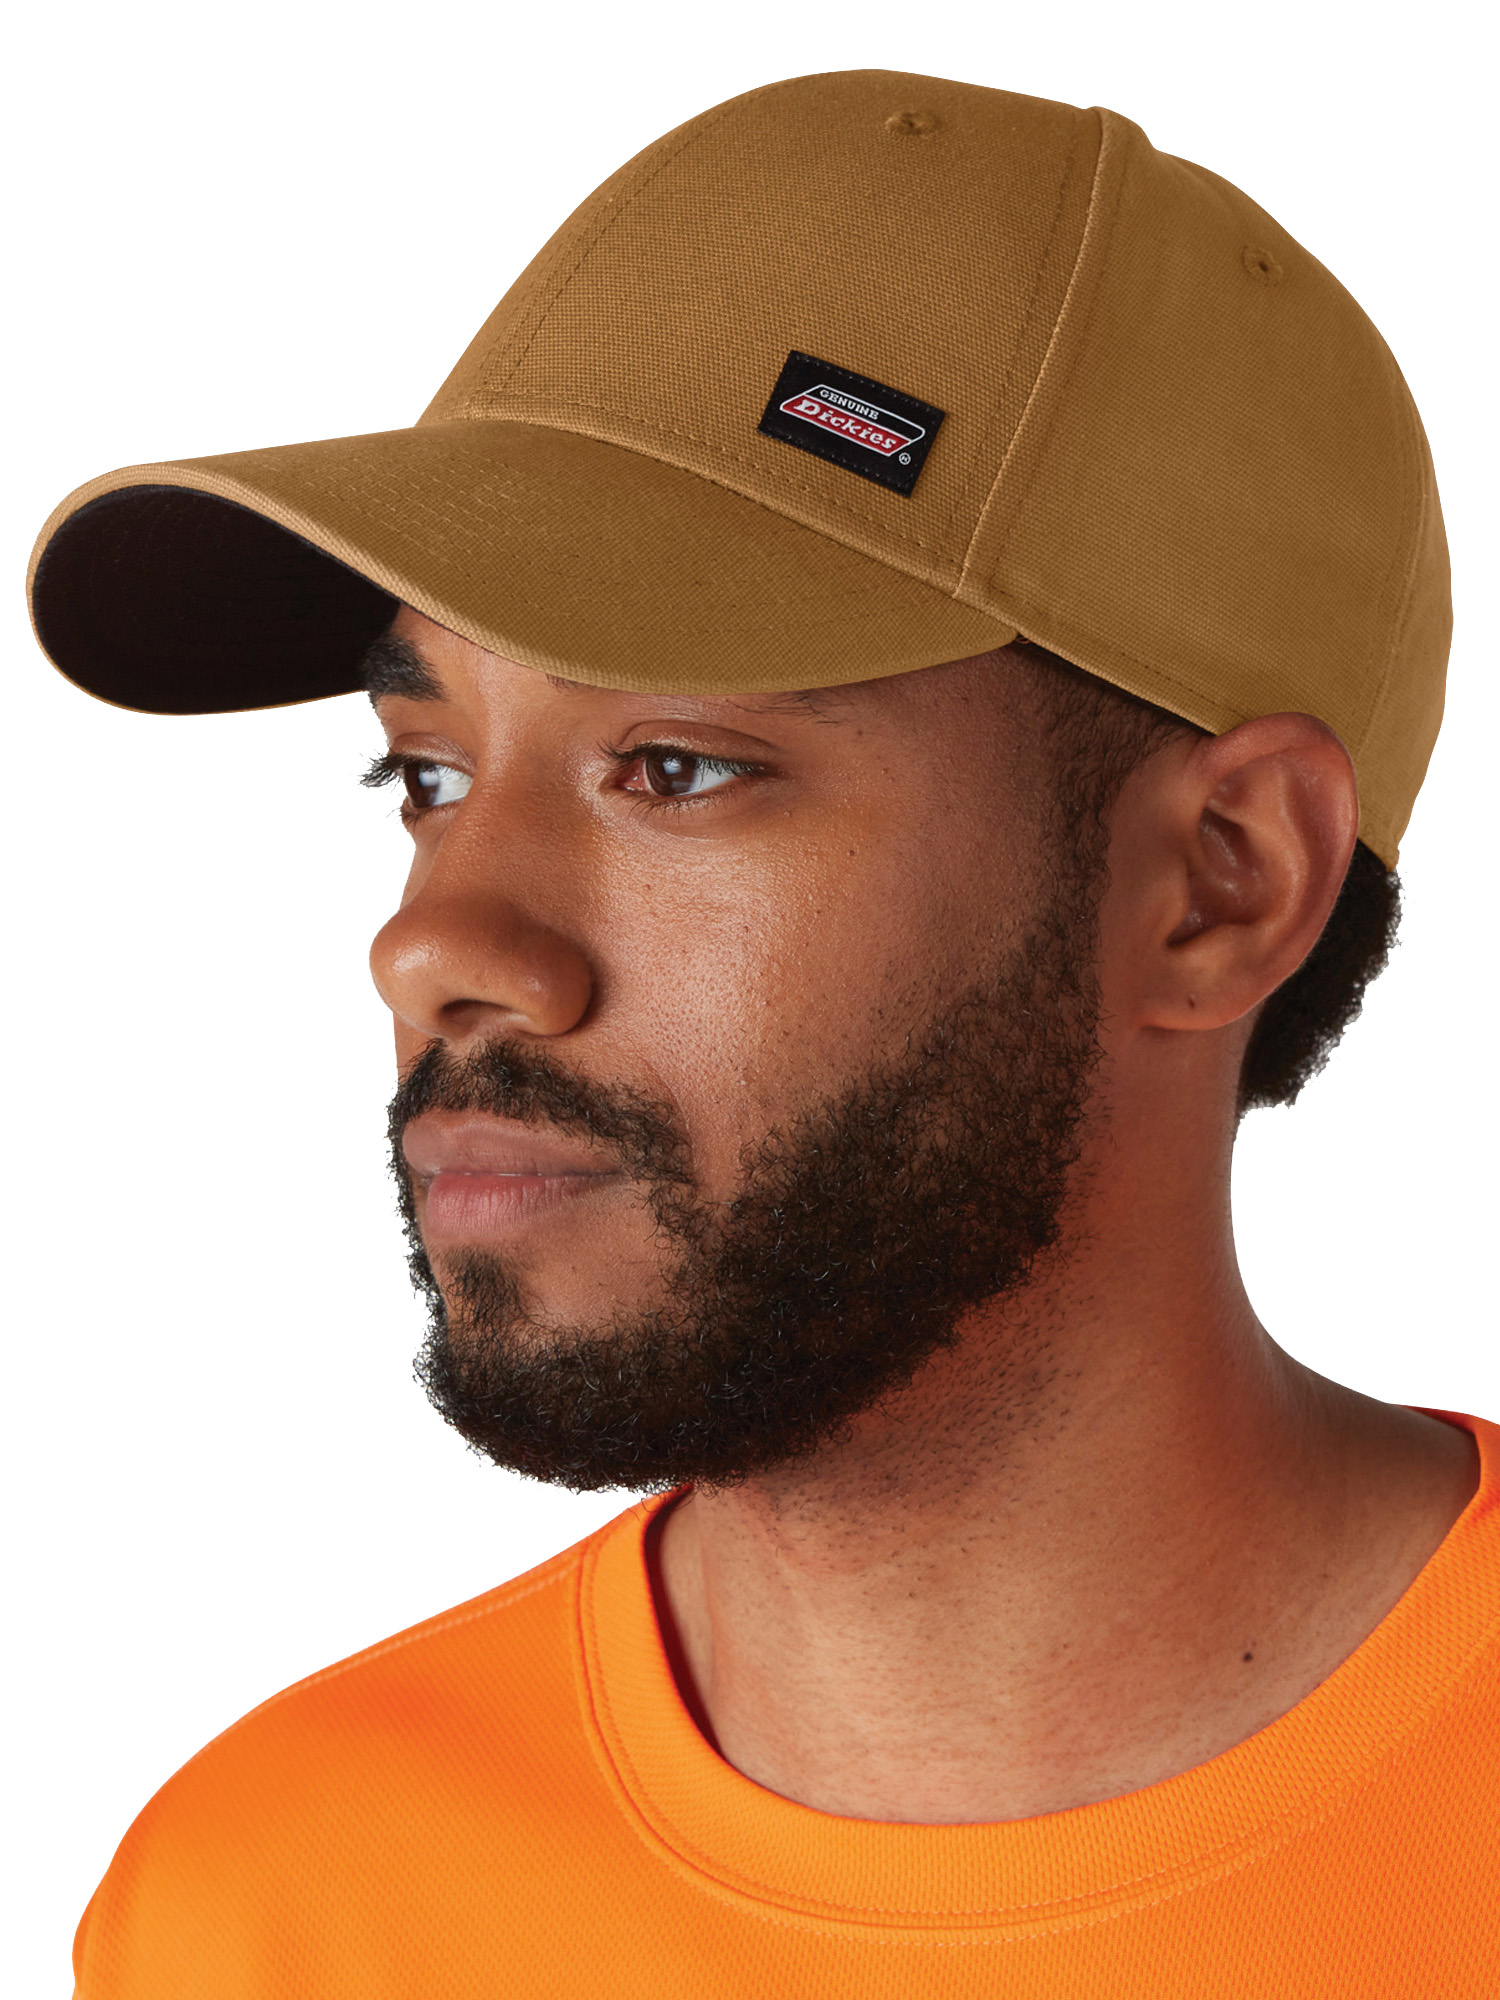 Dickies Water Defense Canvas Ballcap only $6.50: eDeal Info